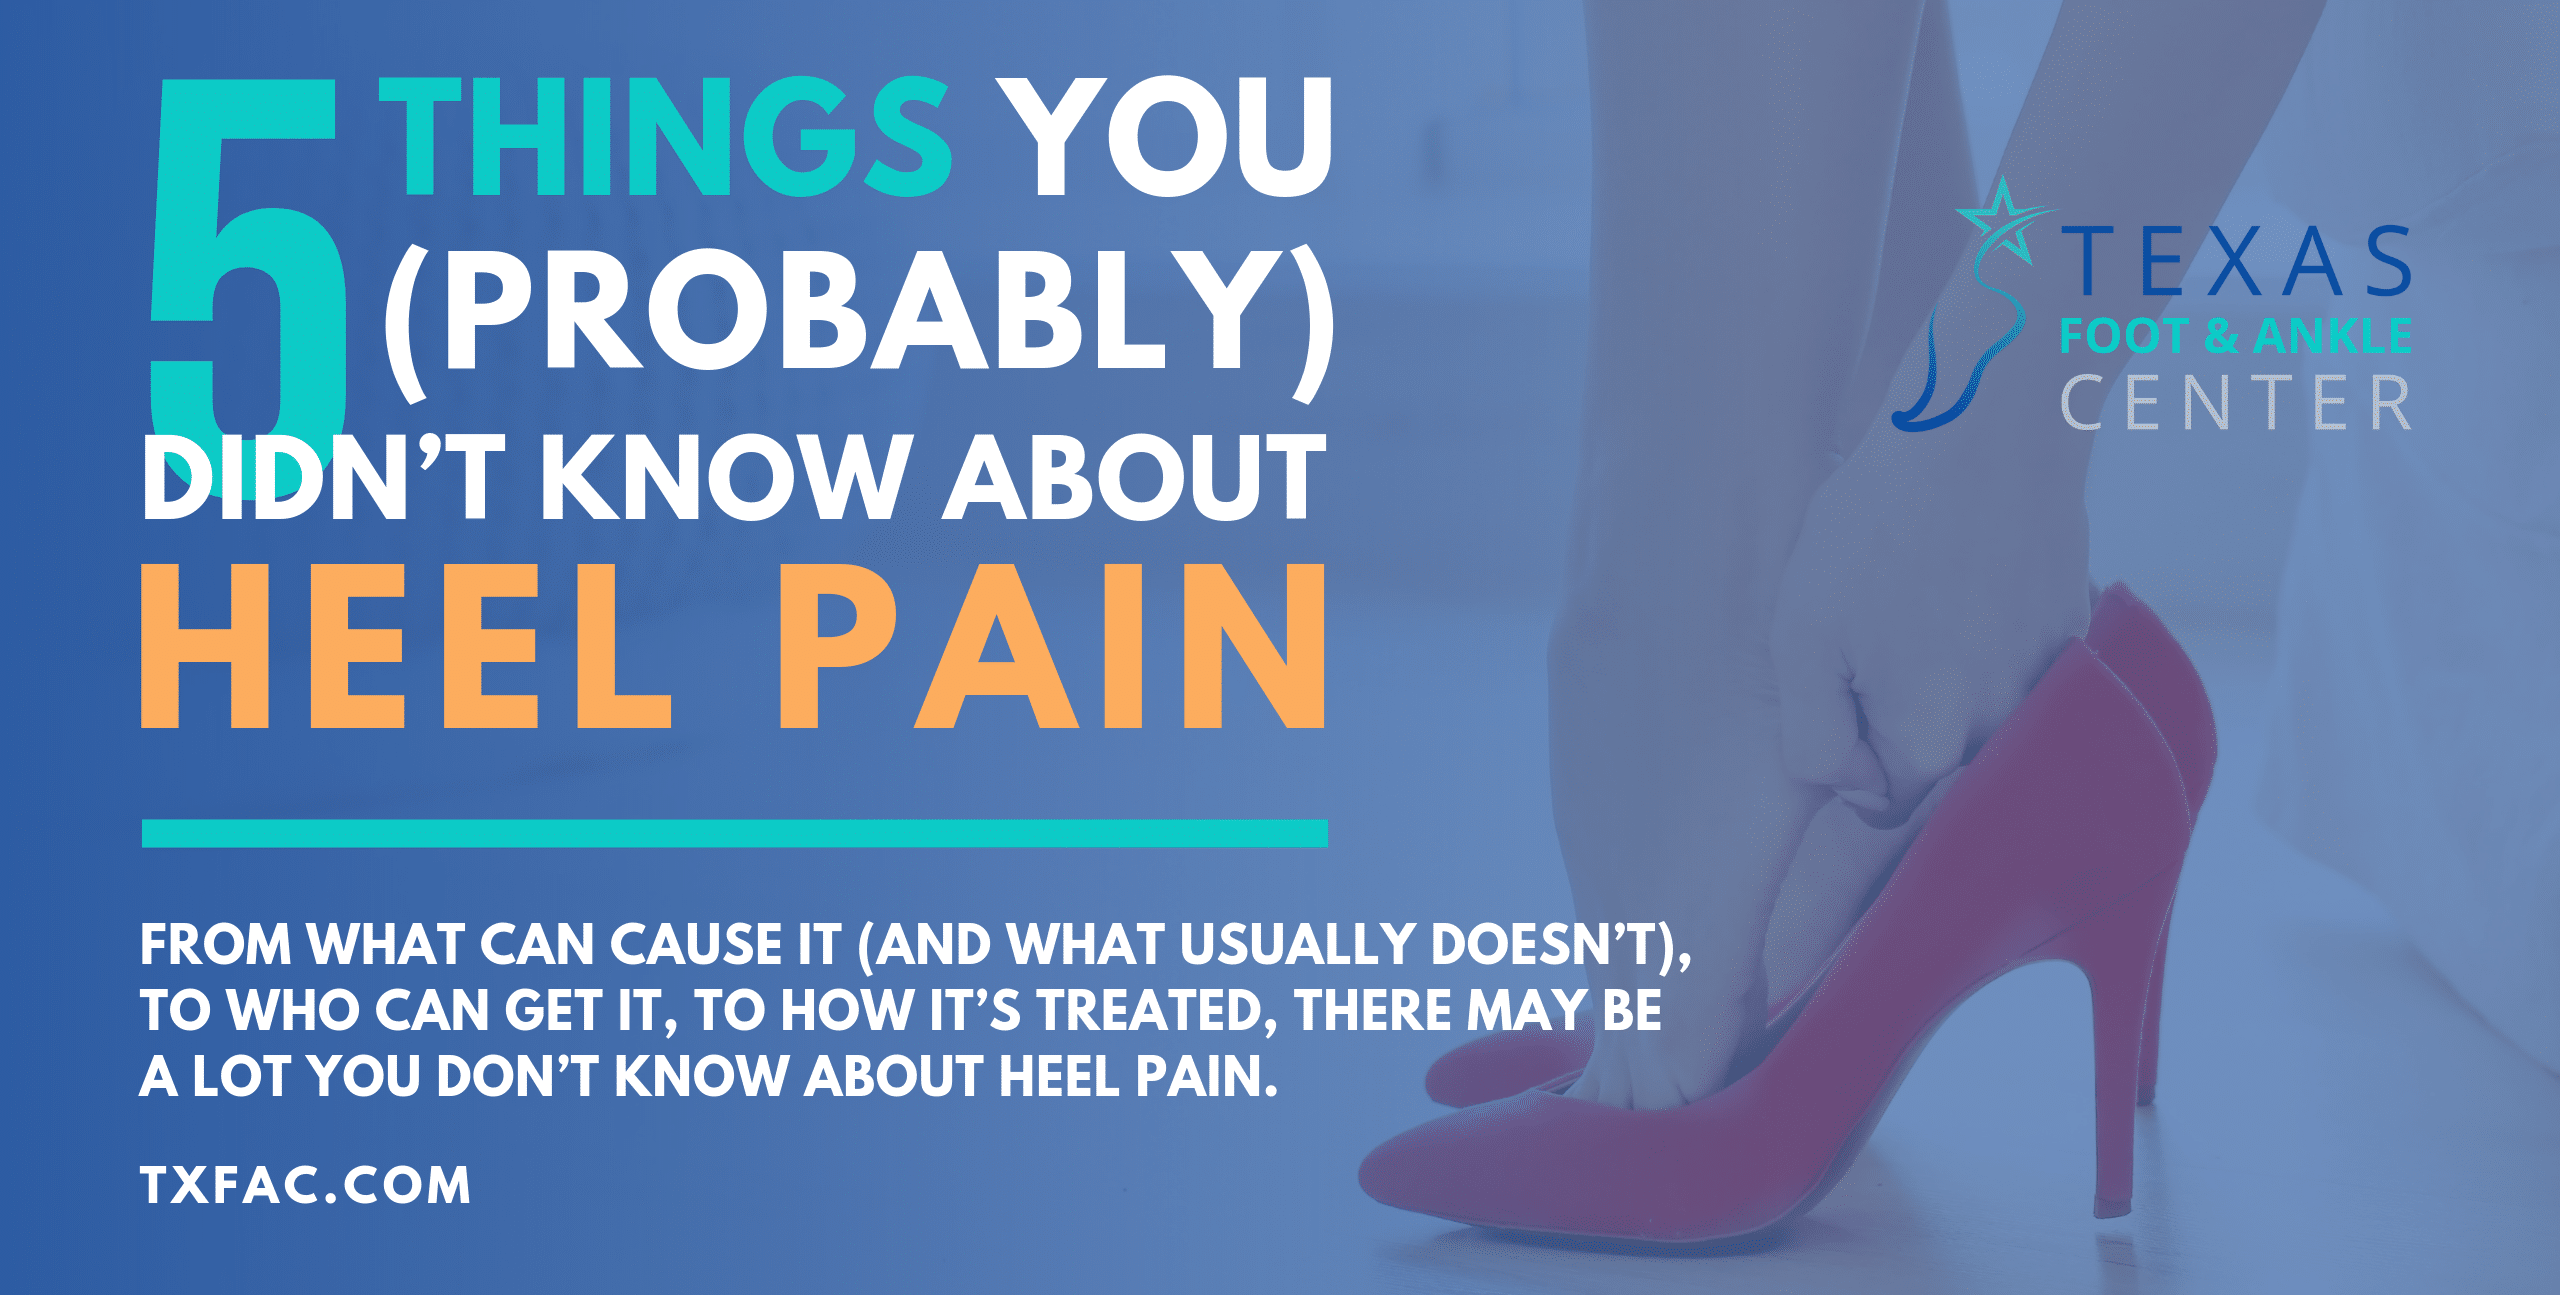 5 Things You [Probably] Didn't Know About Heel Pain